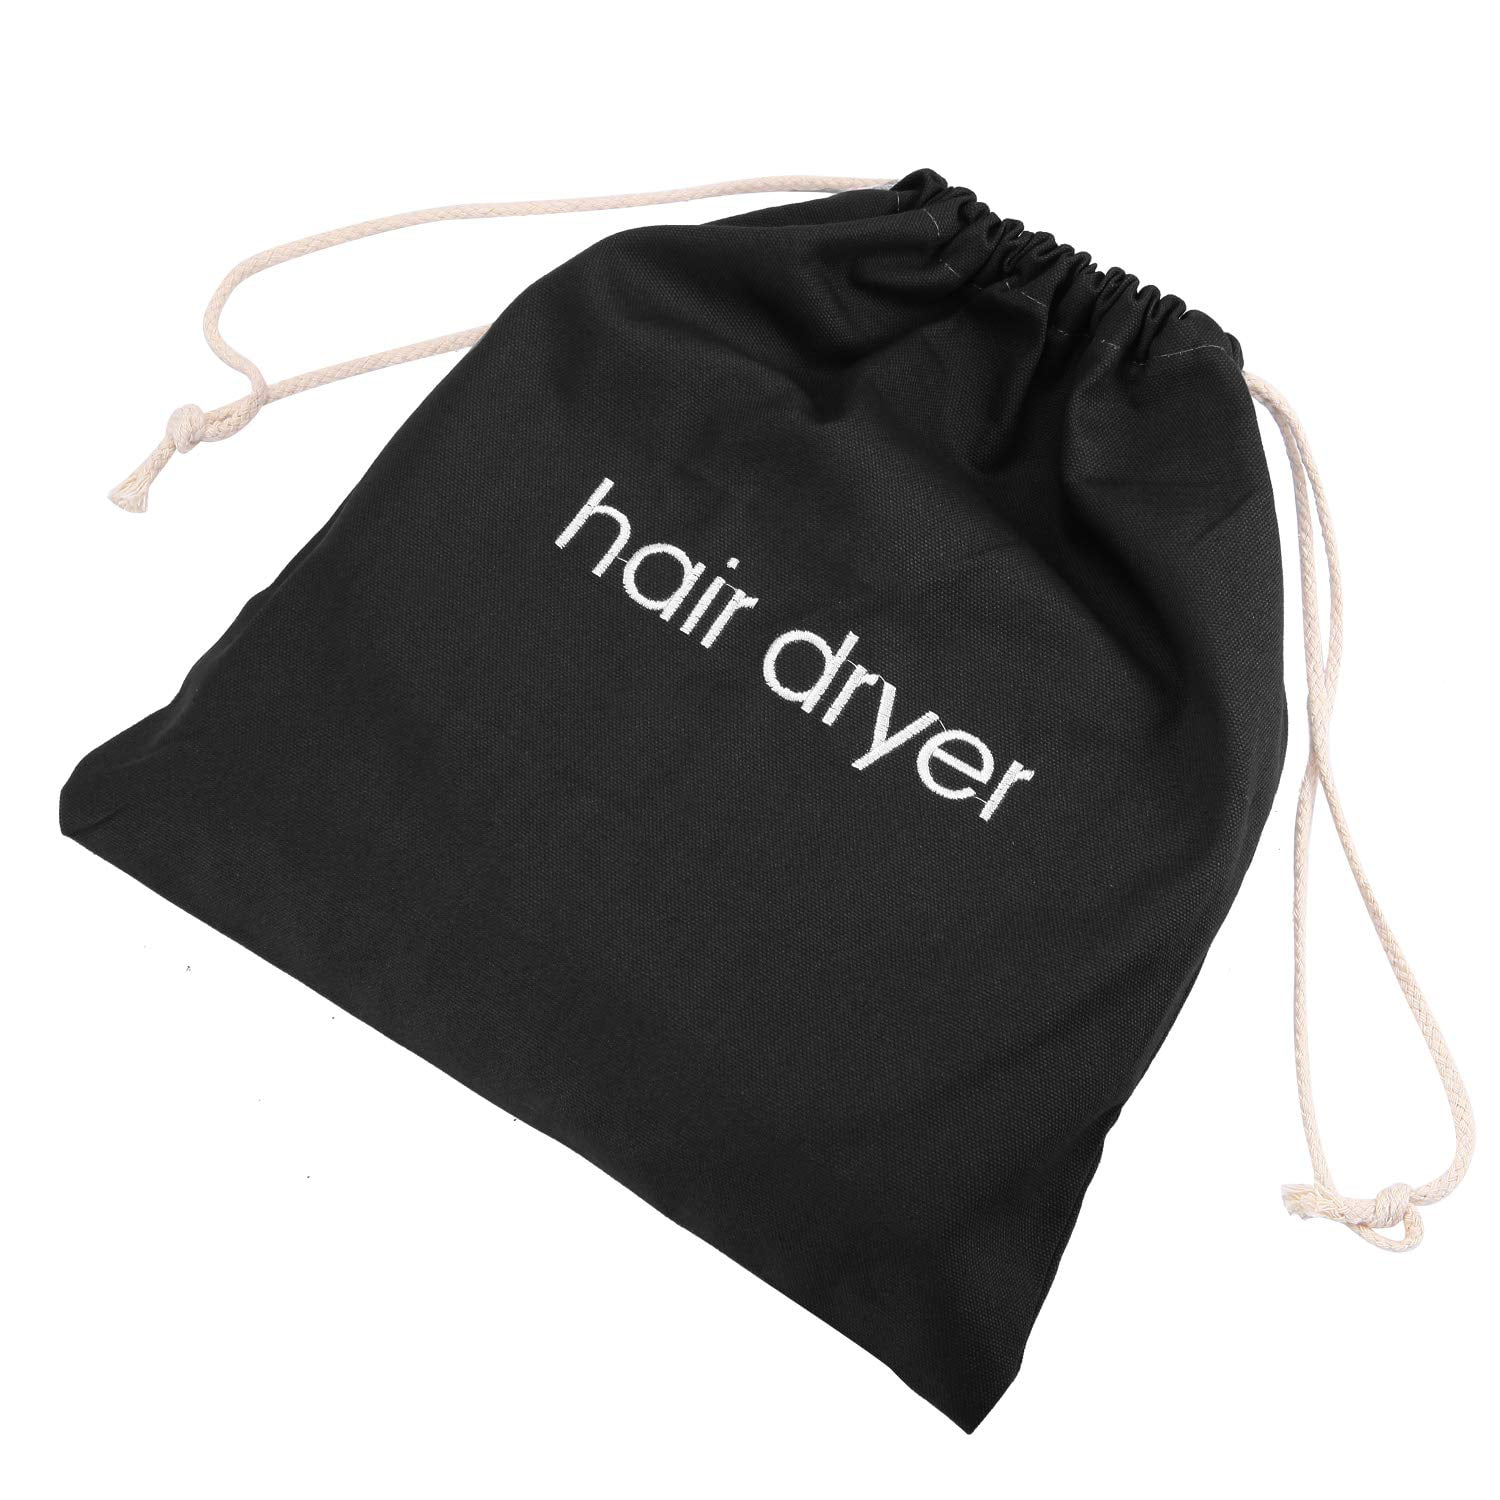 Cotton Hair Dryer Storage Bag Embroidered for Hotel Luggage Travel Hairdryer Bag 